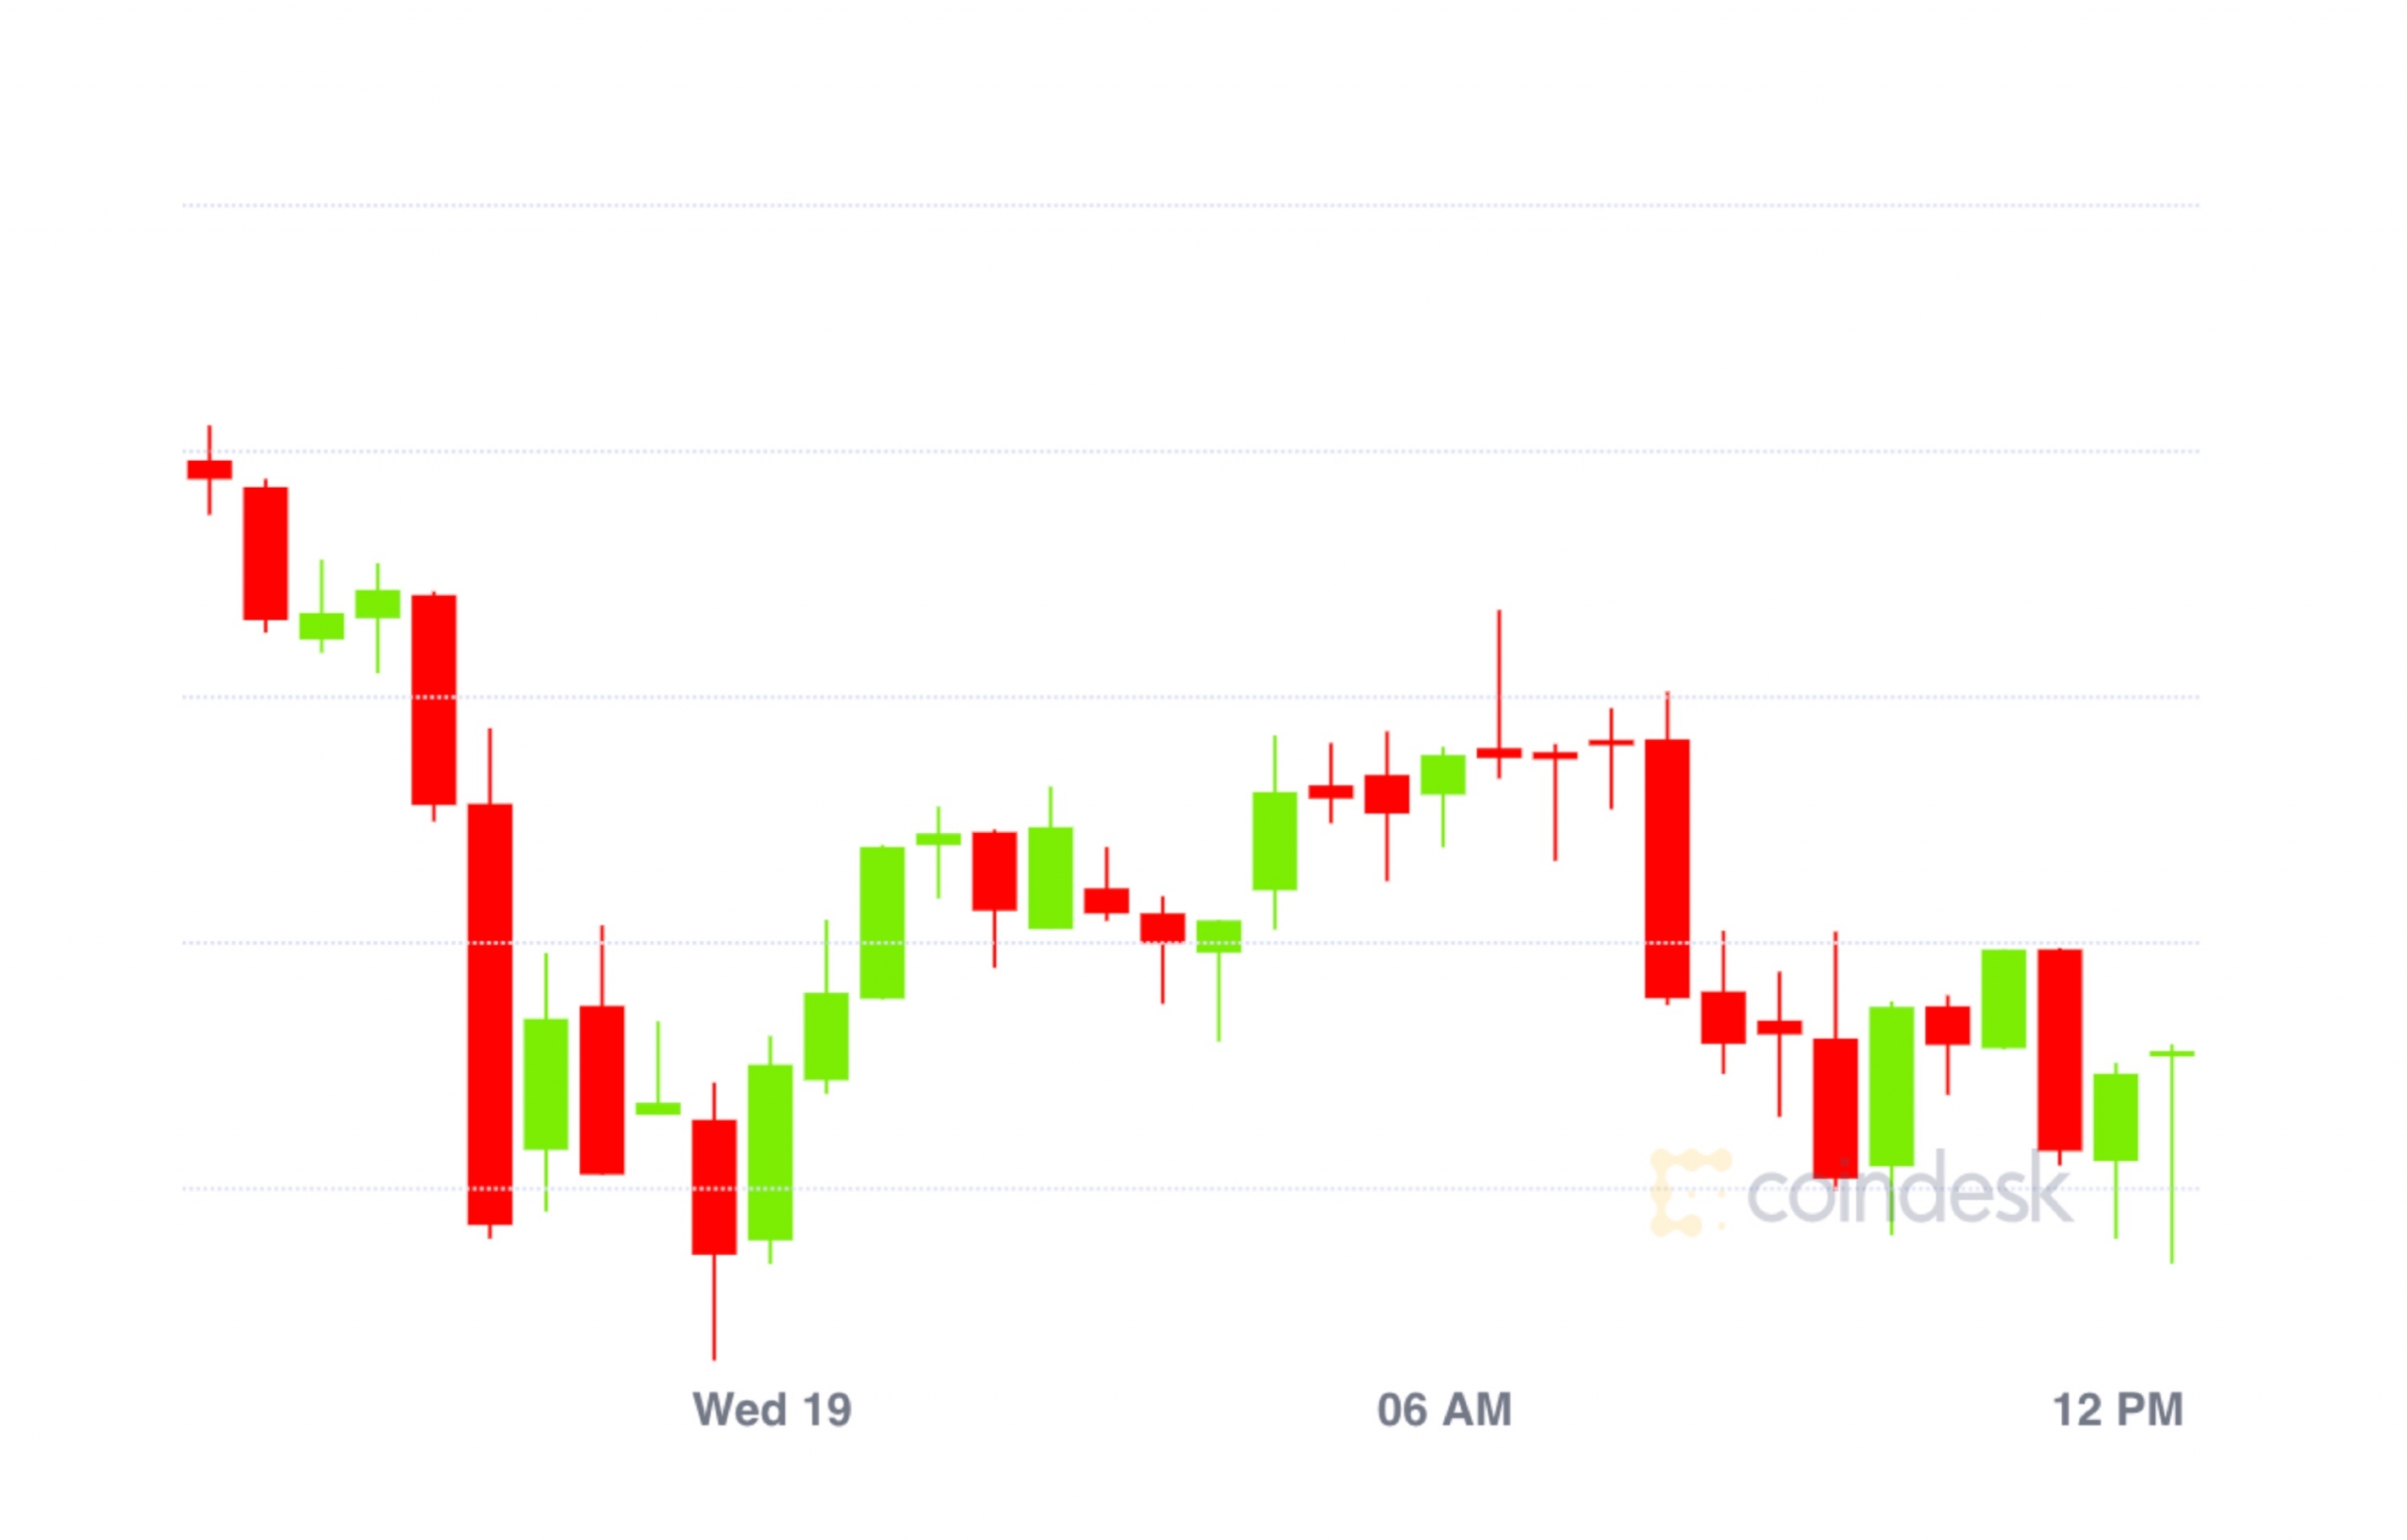 Market Wrap: Bitcoin Sinks to $11.6K as Ether’s Fuel Retains Rising